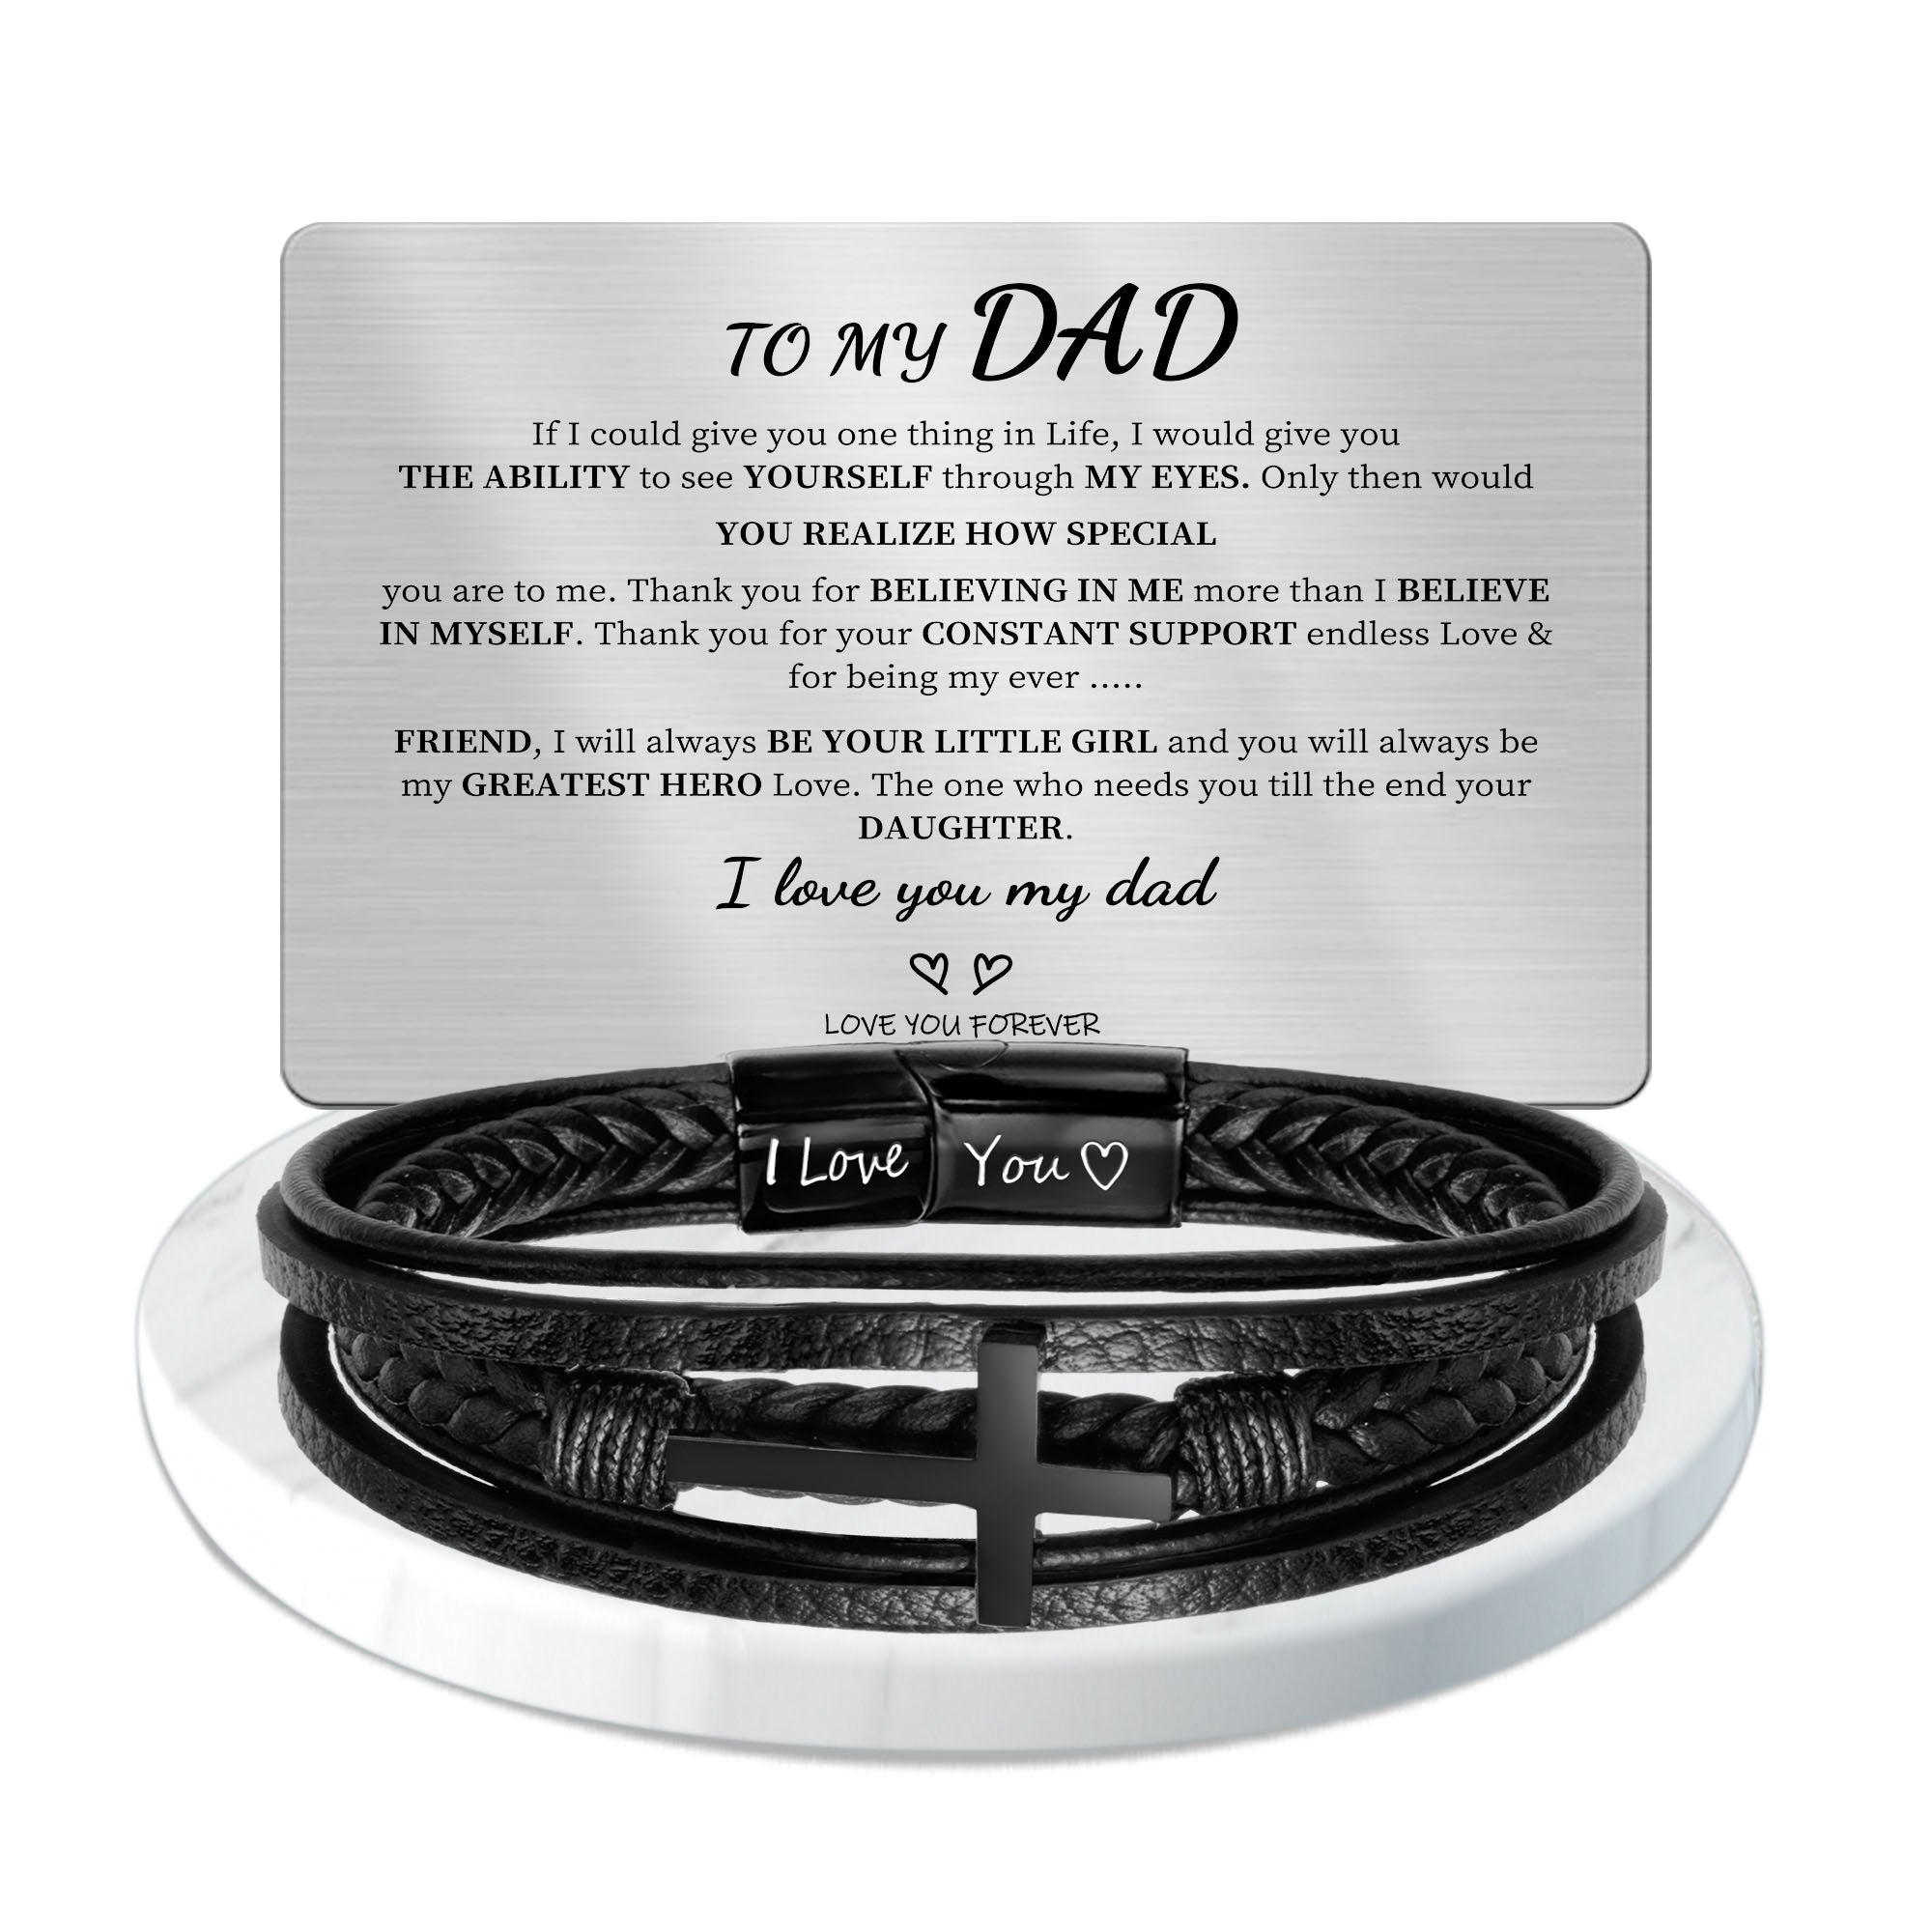 3 / To Dad / 7.5 inch